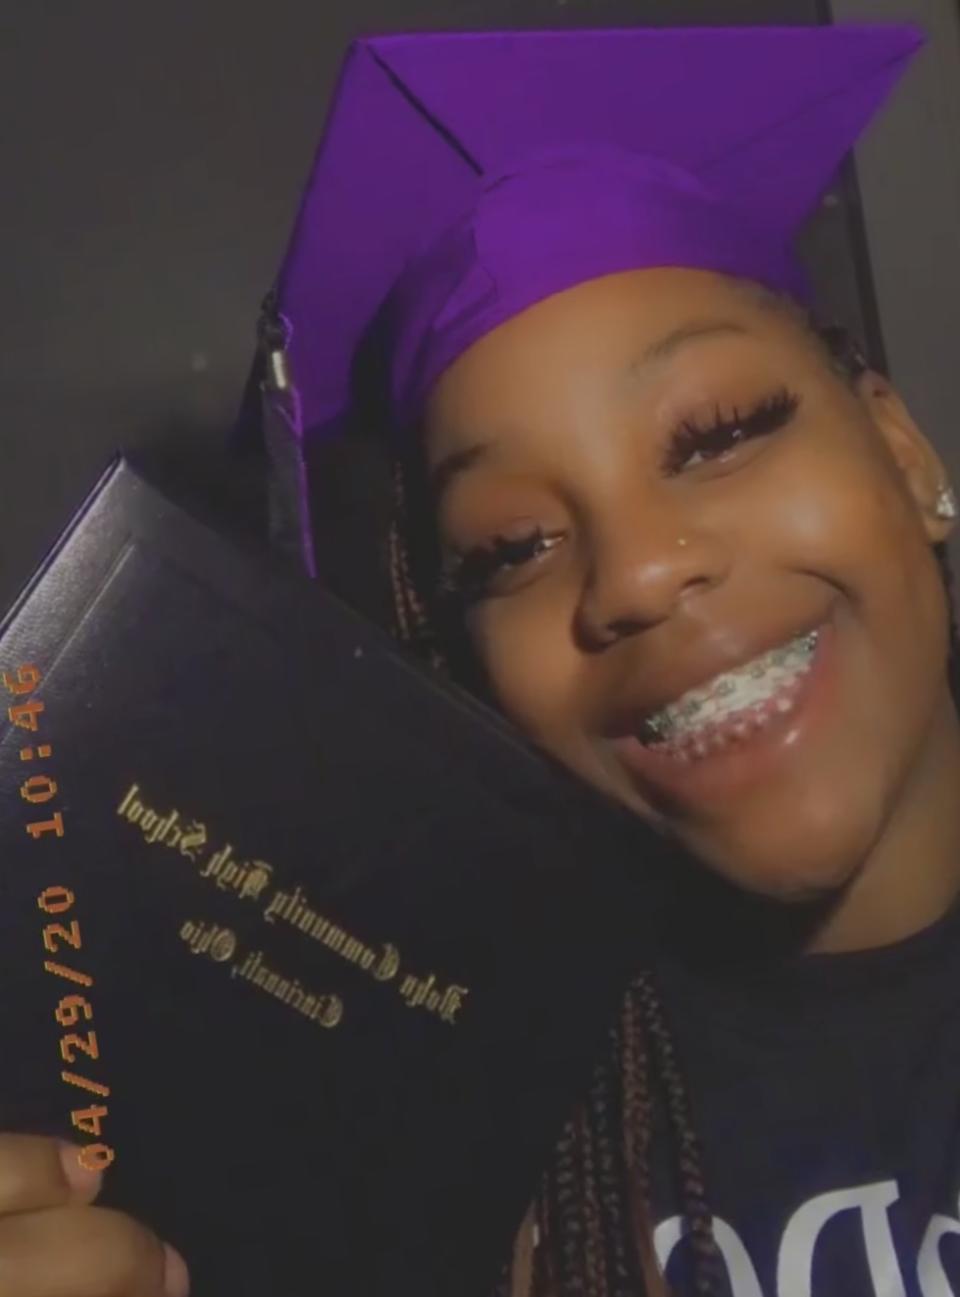 Vic'Tajia Stuckey poses excitedly with her diploma after graduation ceremony. (Photo: Vic'Tajia Stuckey)